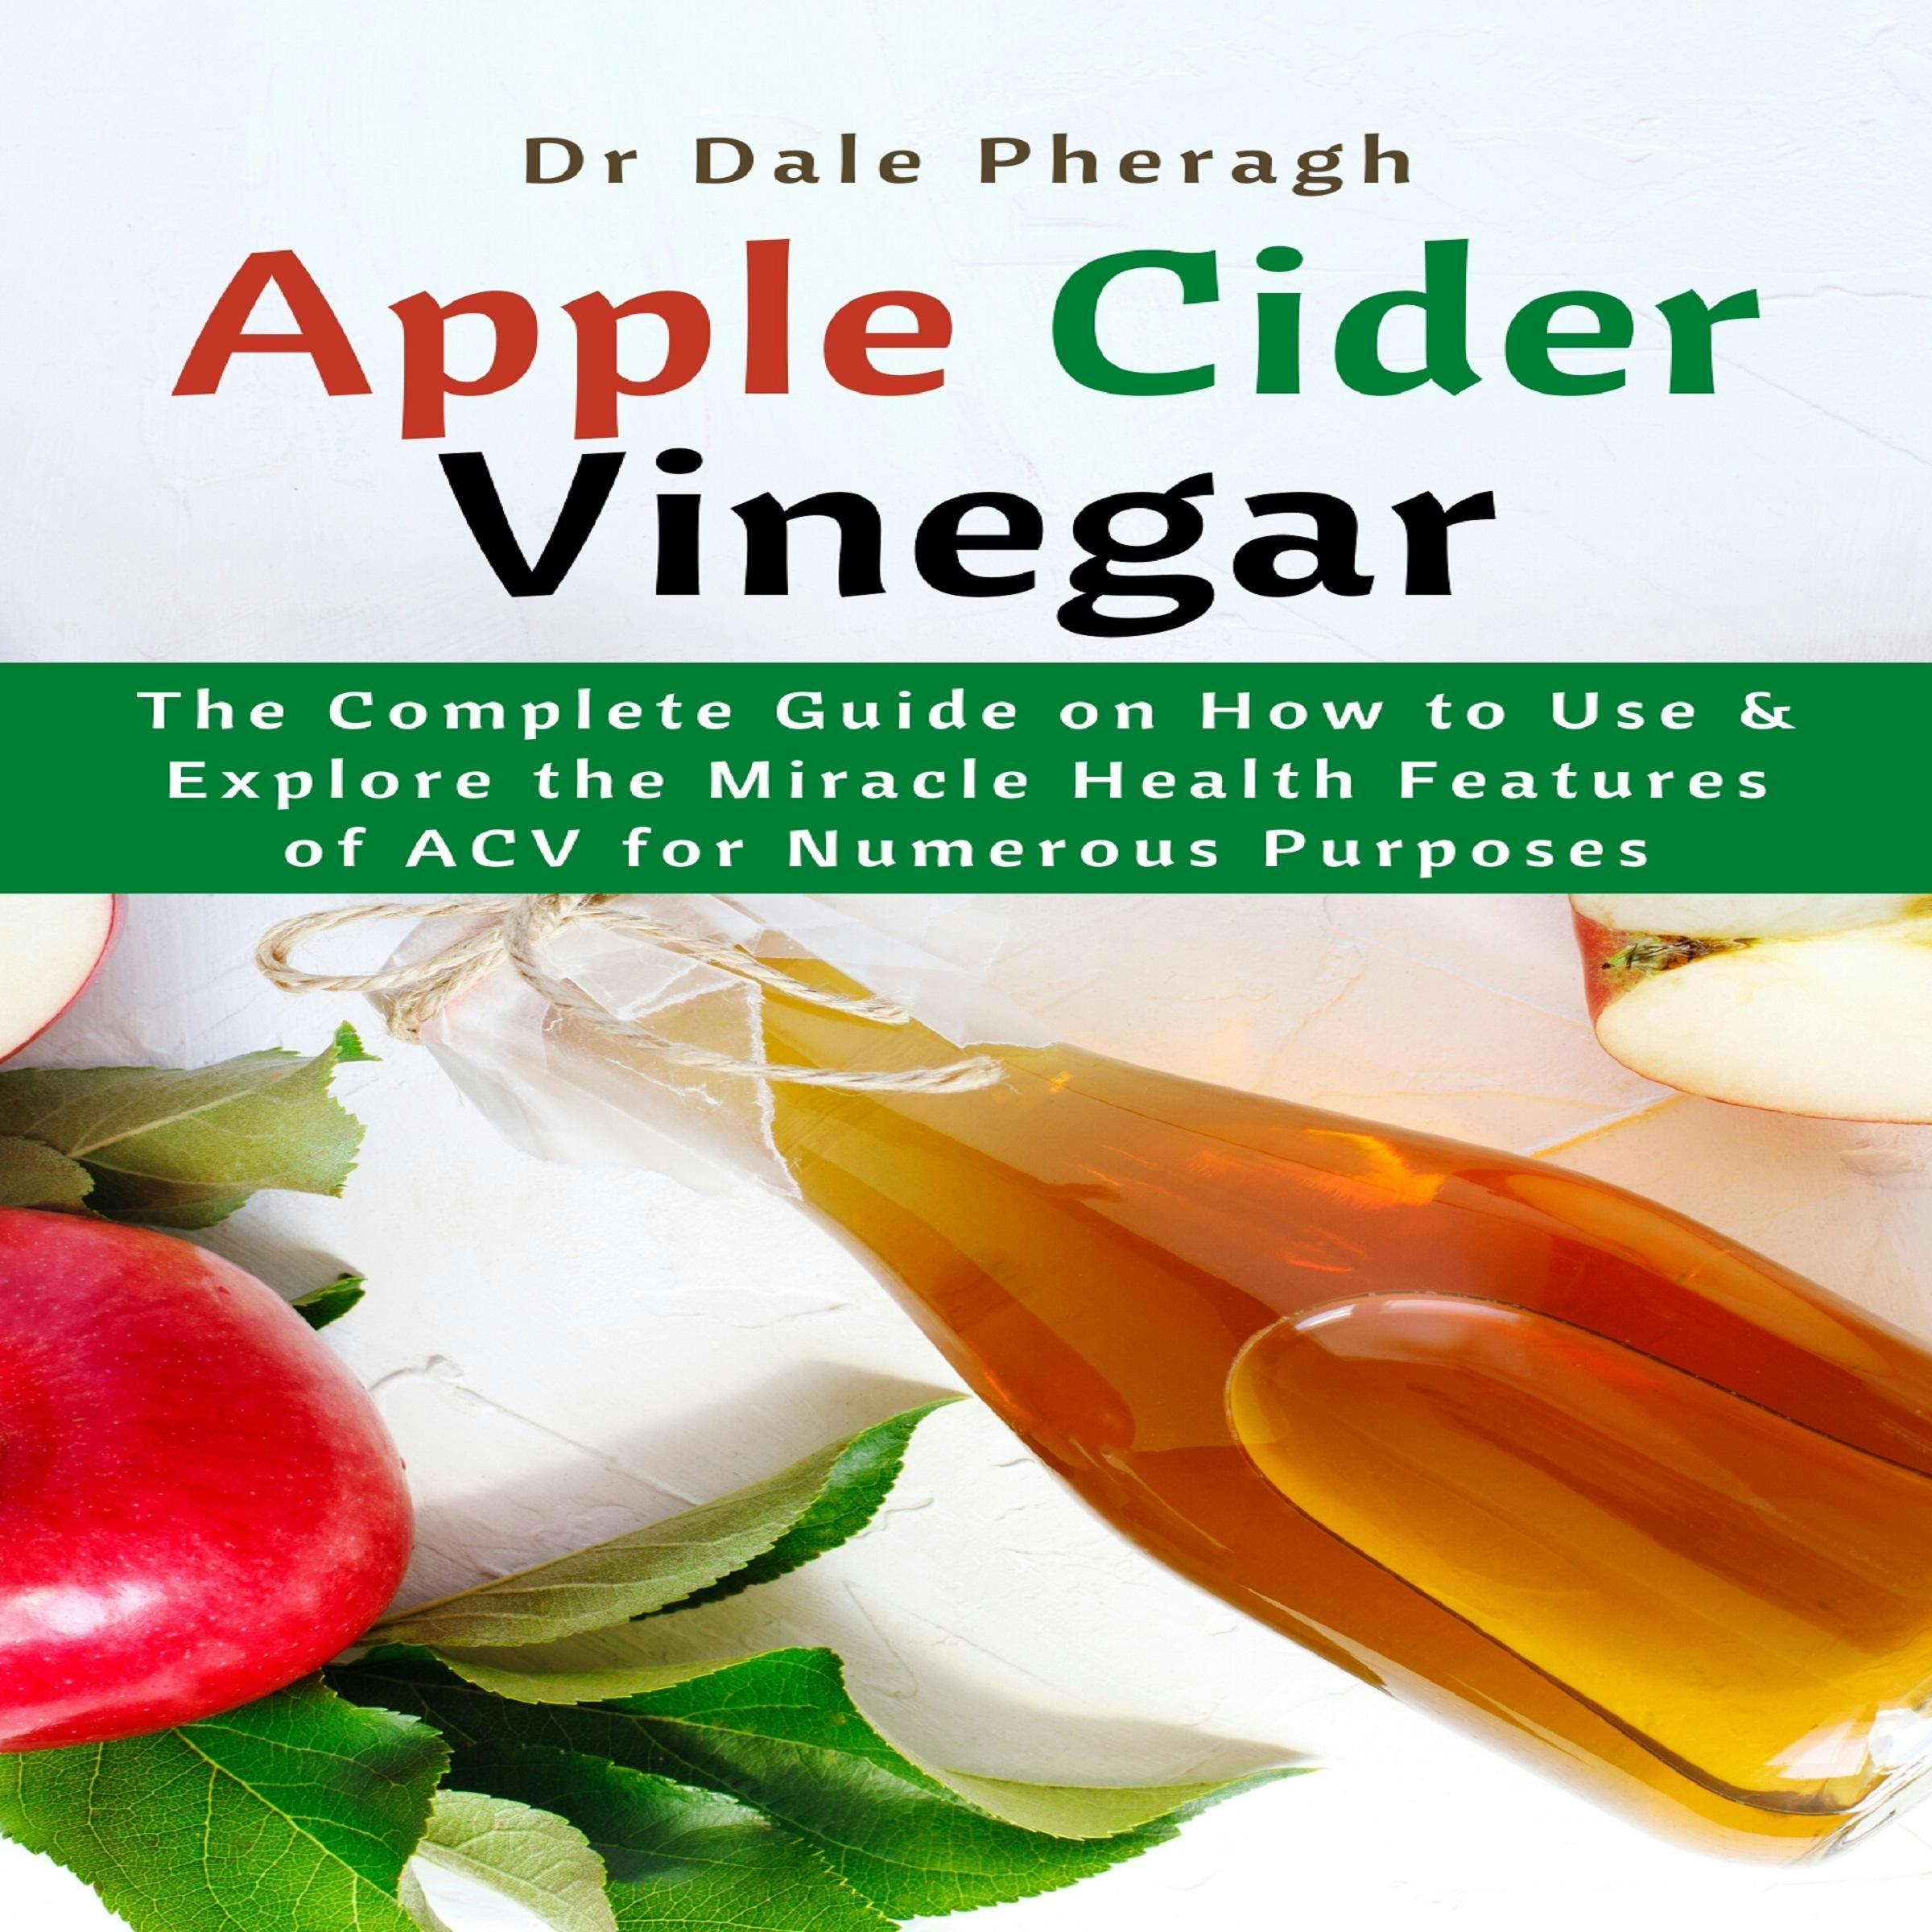 Apple Cider Vinegar: The Complete Guide on How to Use & Explore the Miracle Health Features of ACV for Numerous Purposes - Dr Dale Pheragh